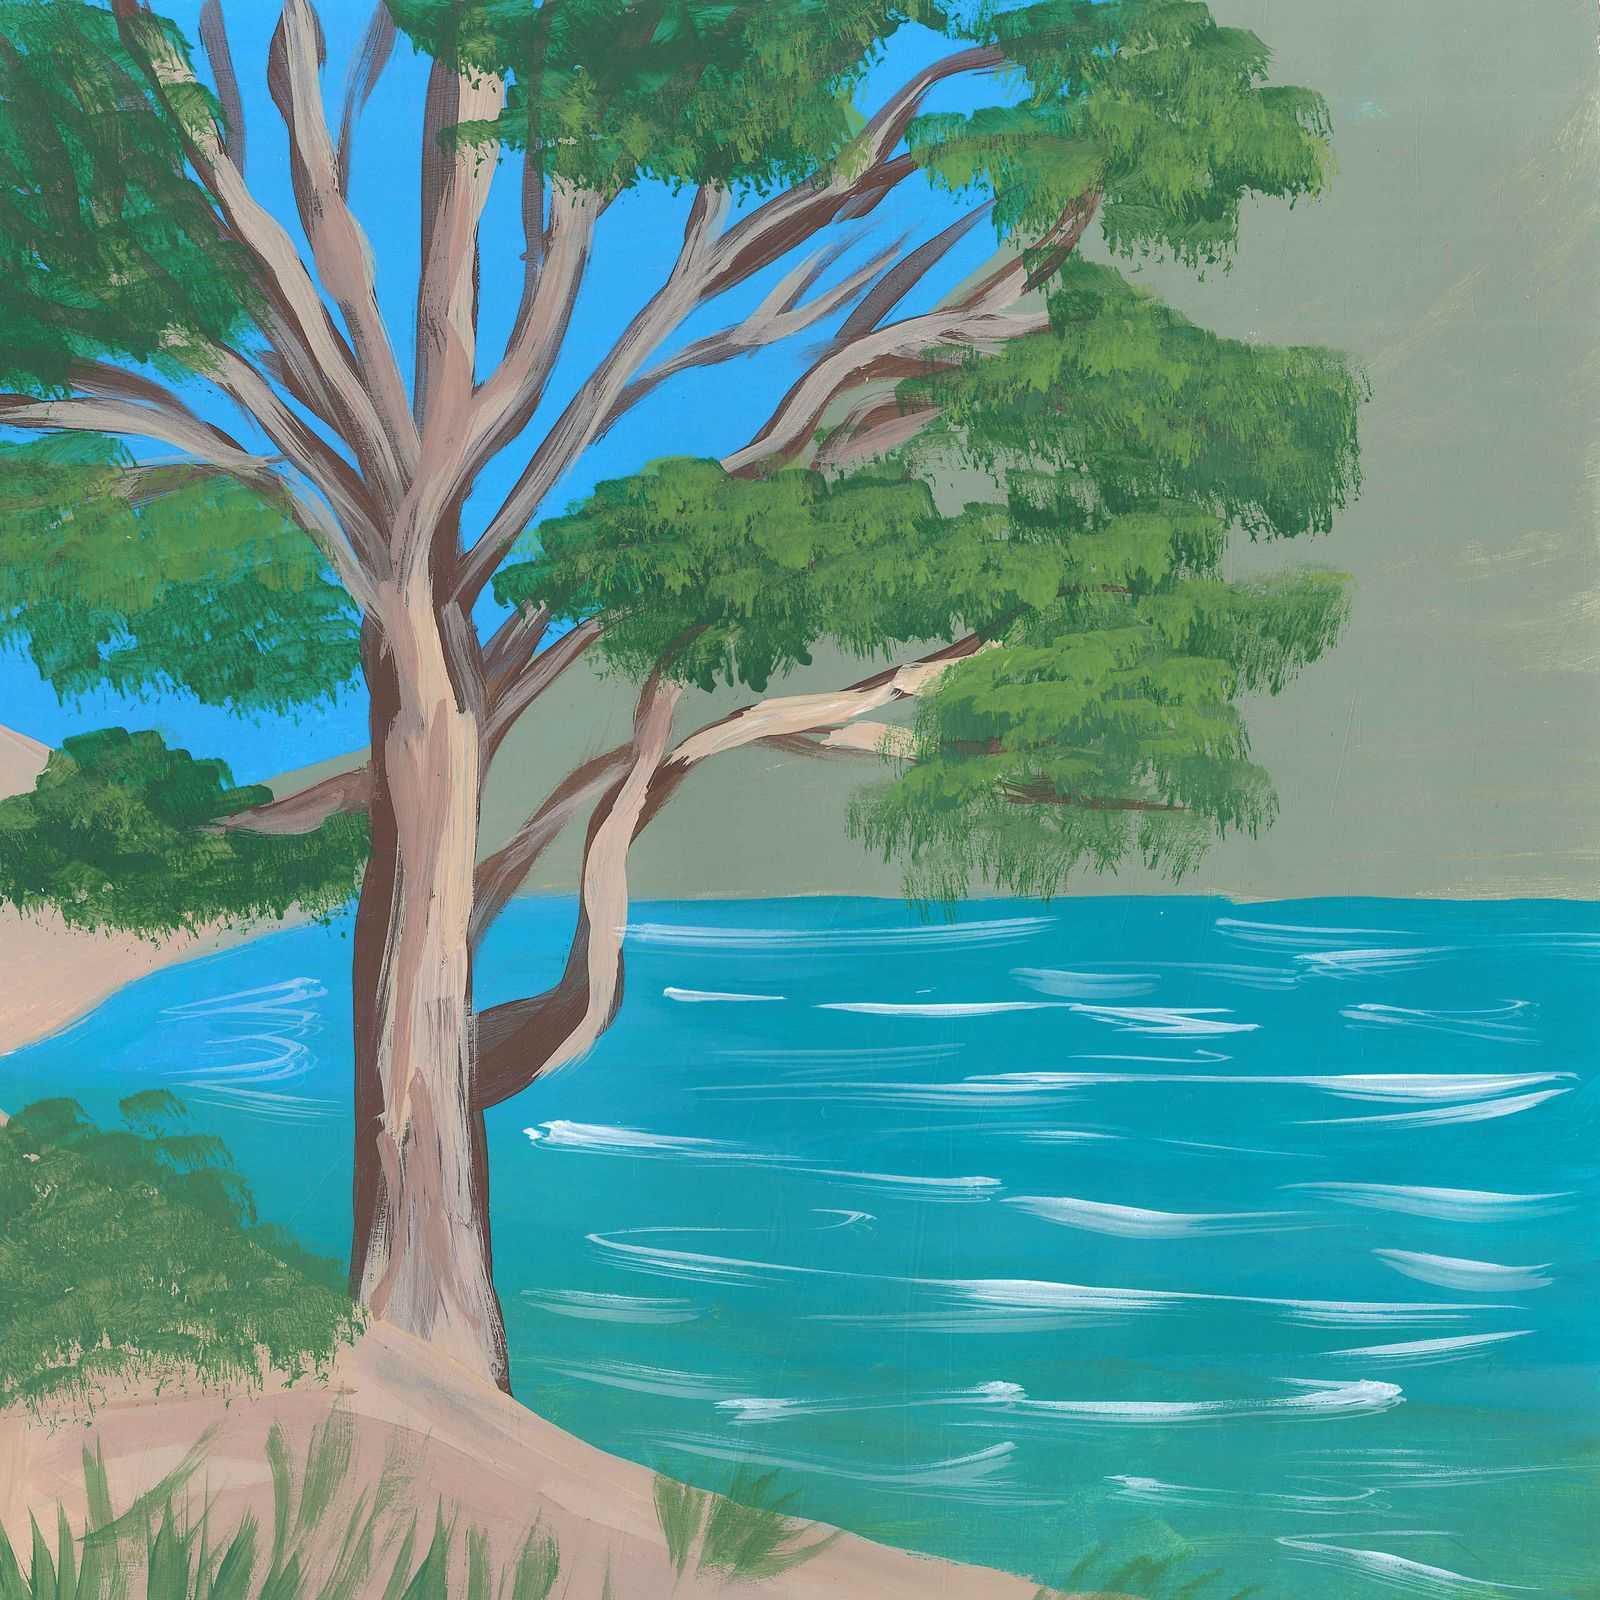 Night Sounds of Magnetic Island - nature landscape painting - earth.fm